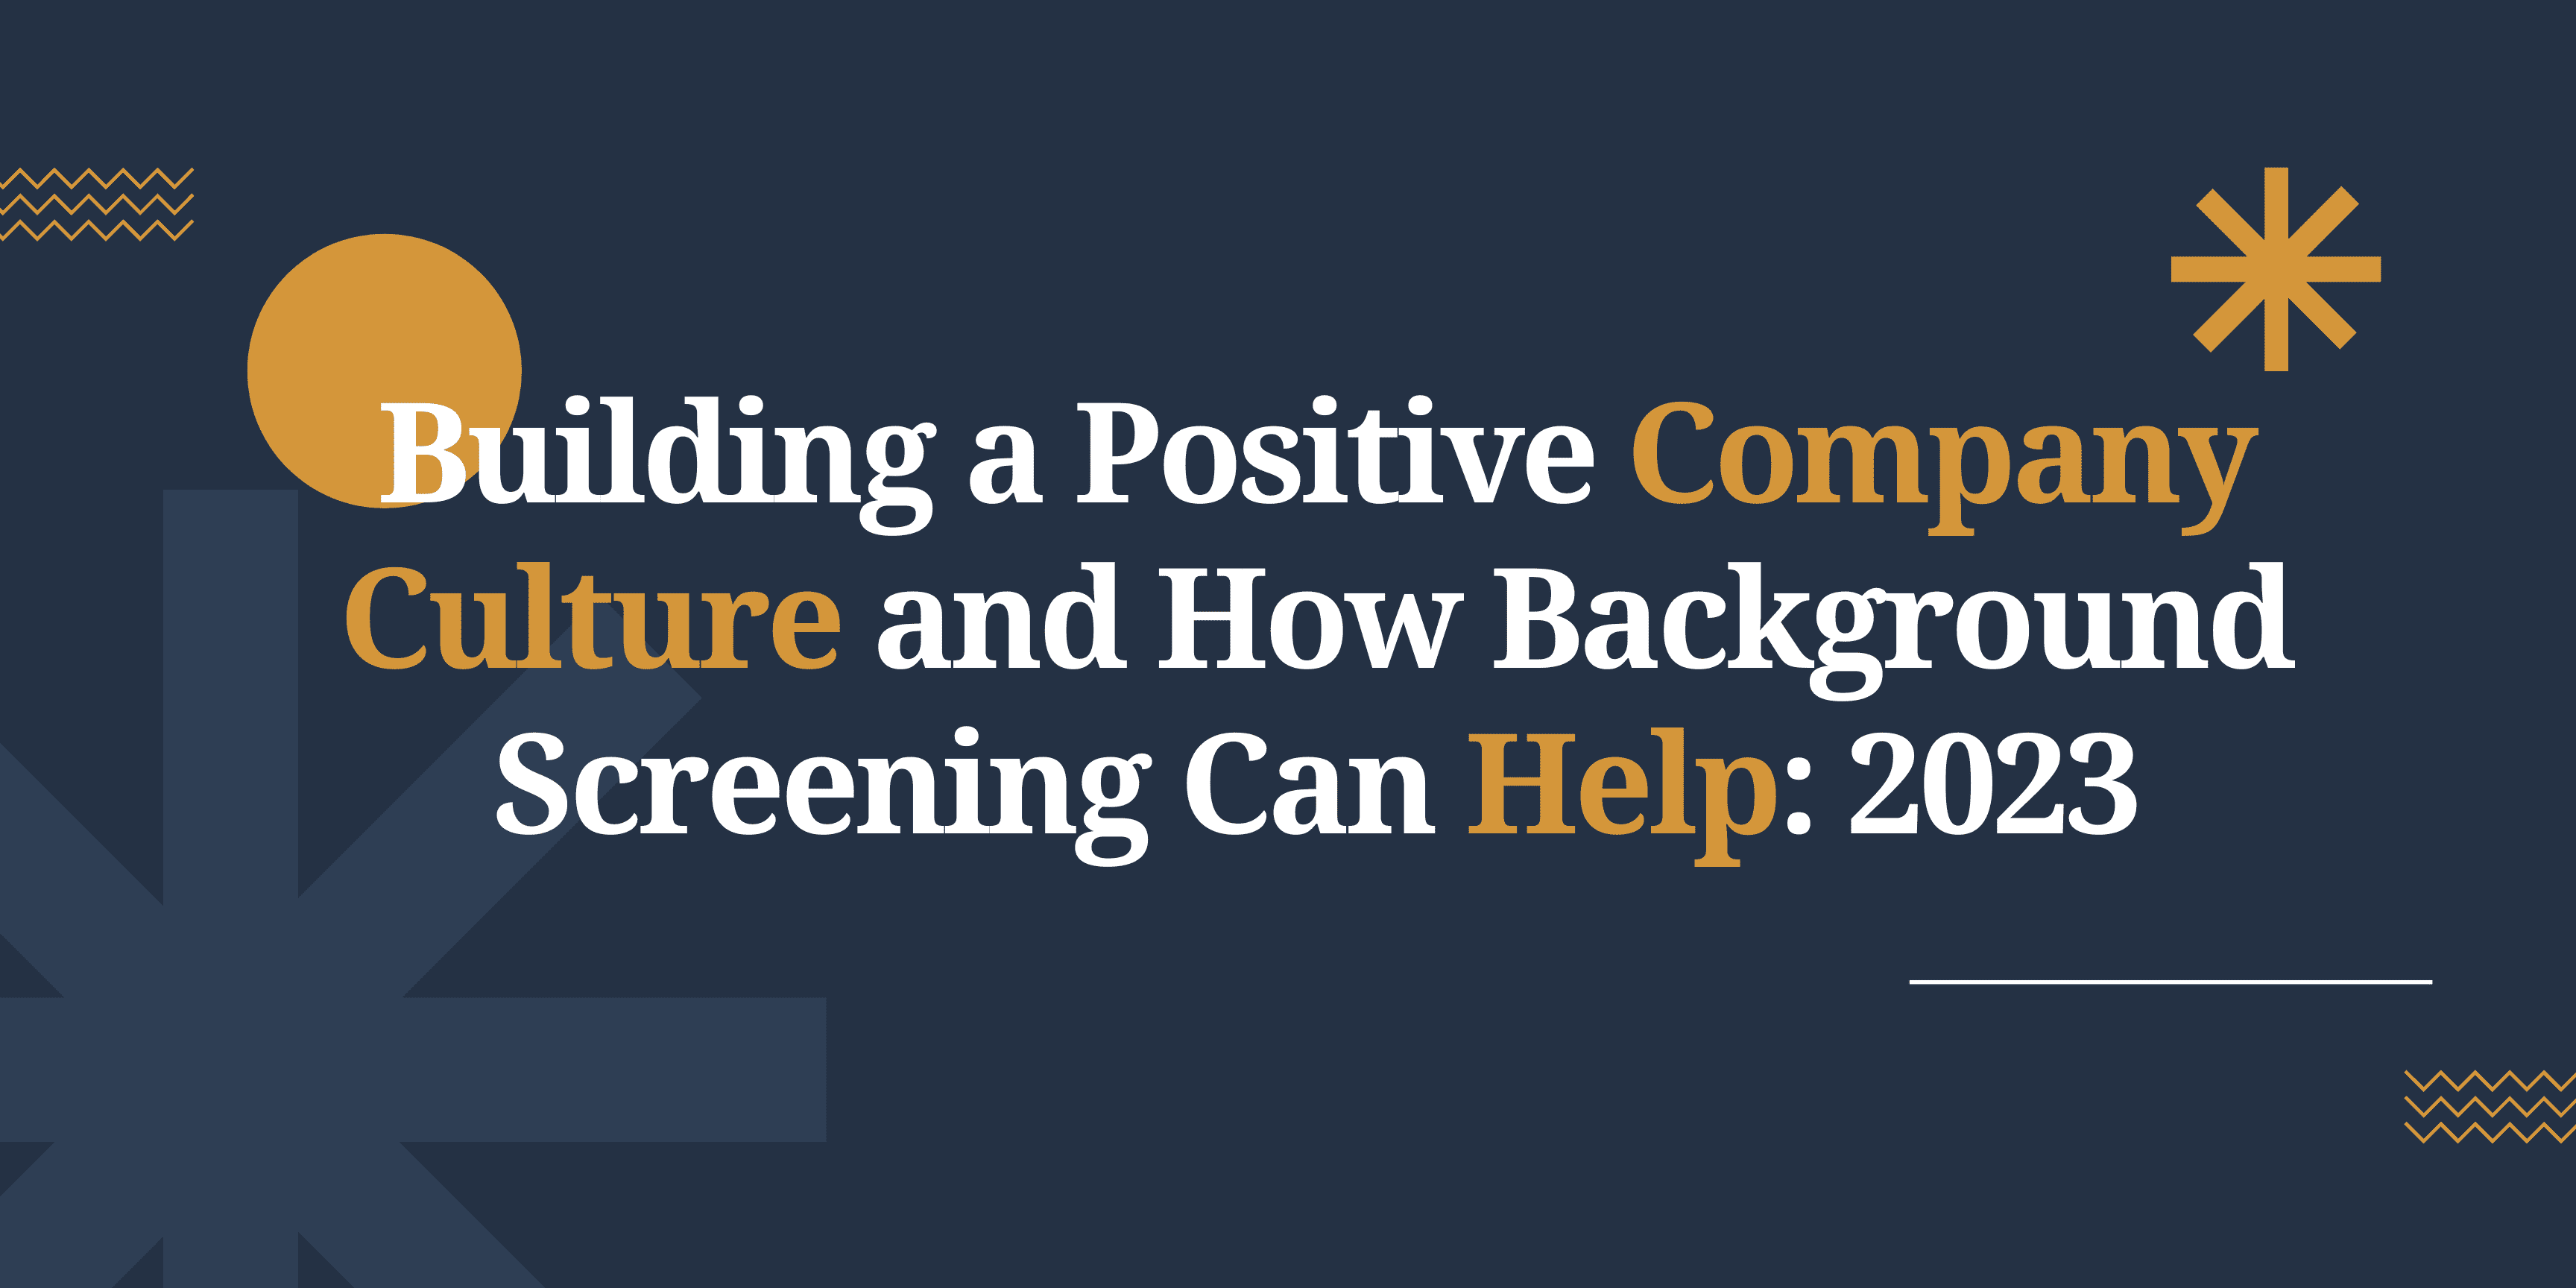 Building a Positive Company Culture and How Background Screening Can Help:2023